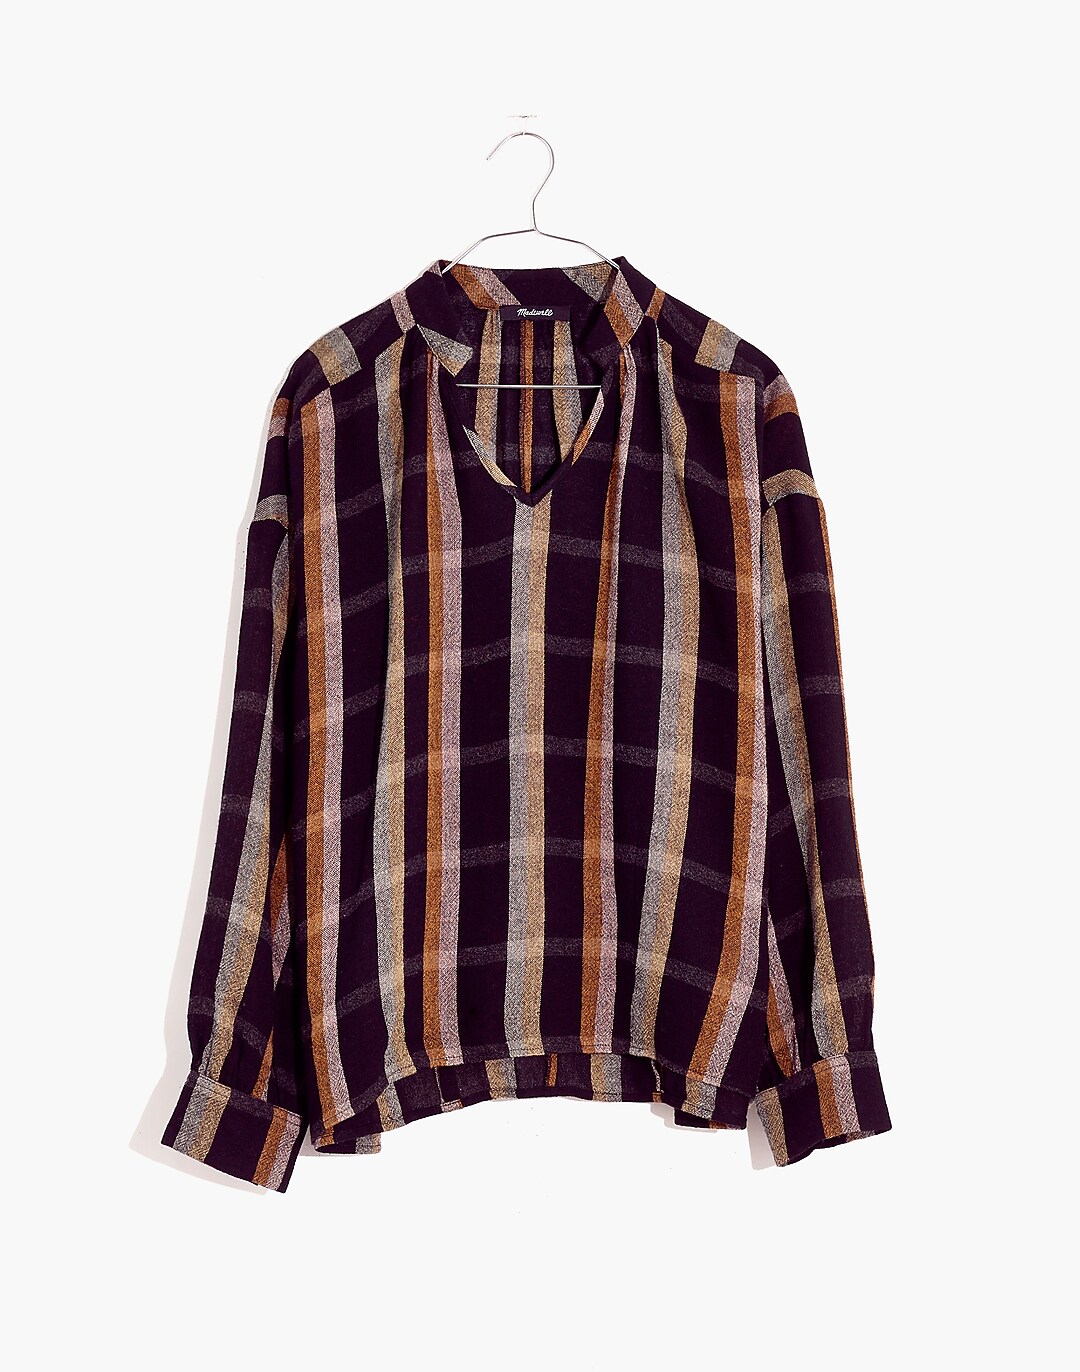 Highroad Popover Shirt in Lessing Plaid